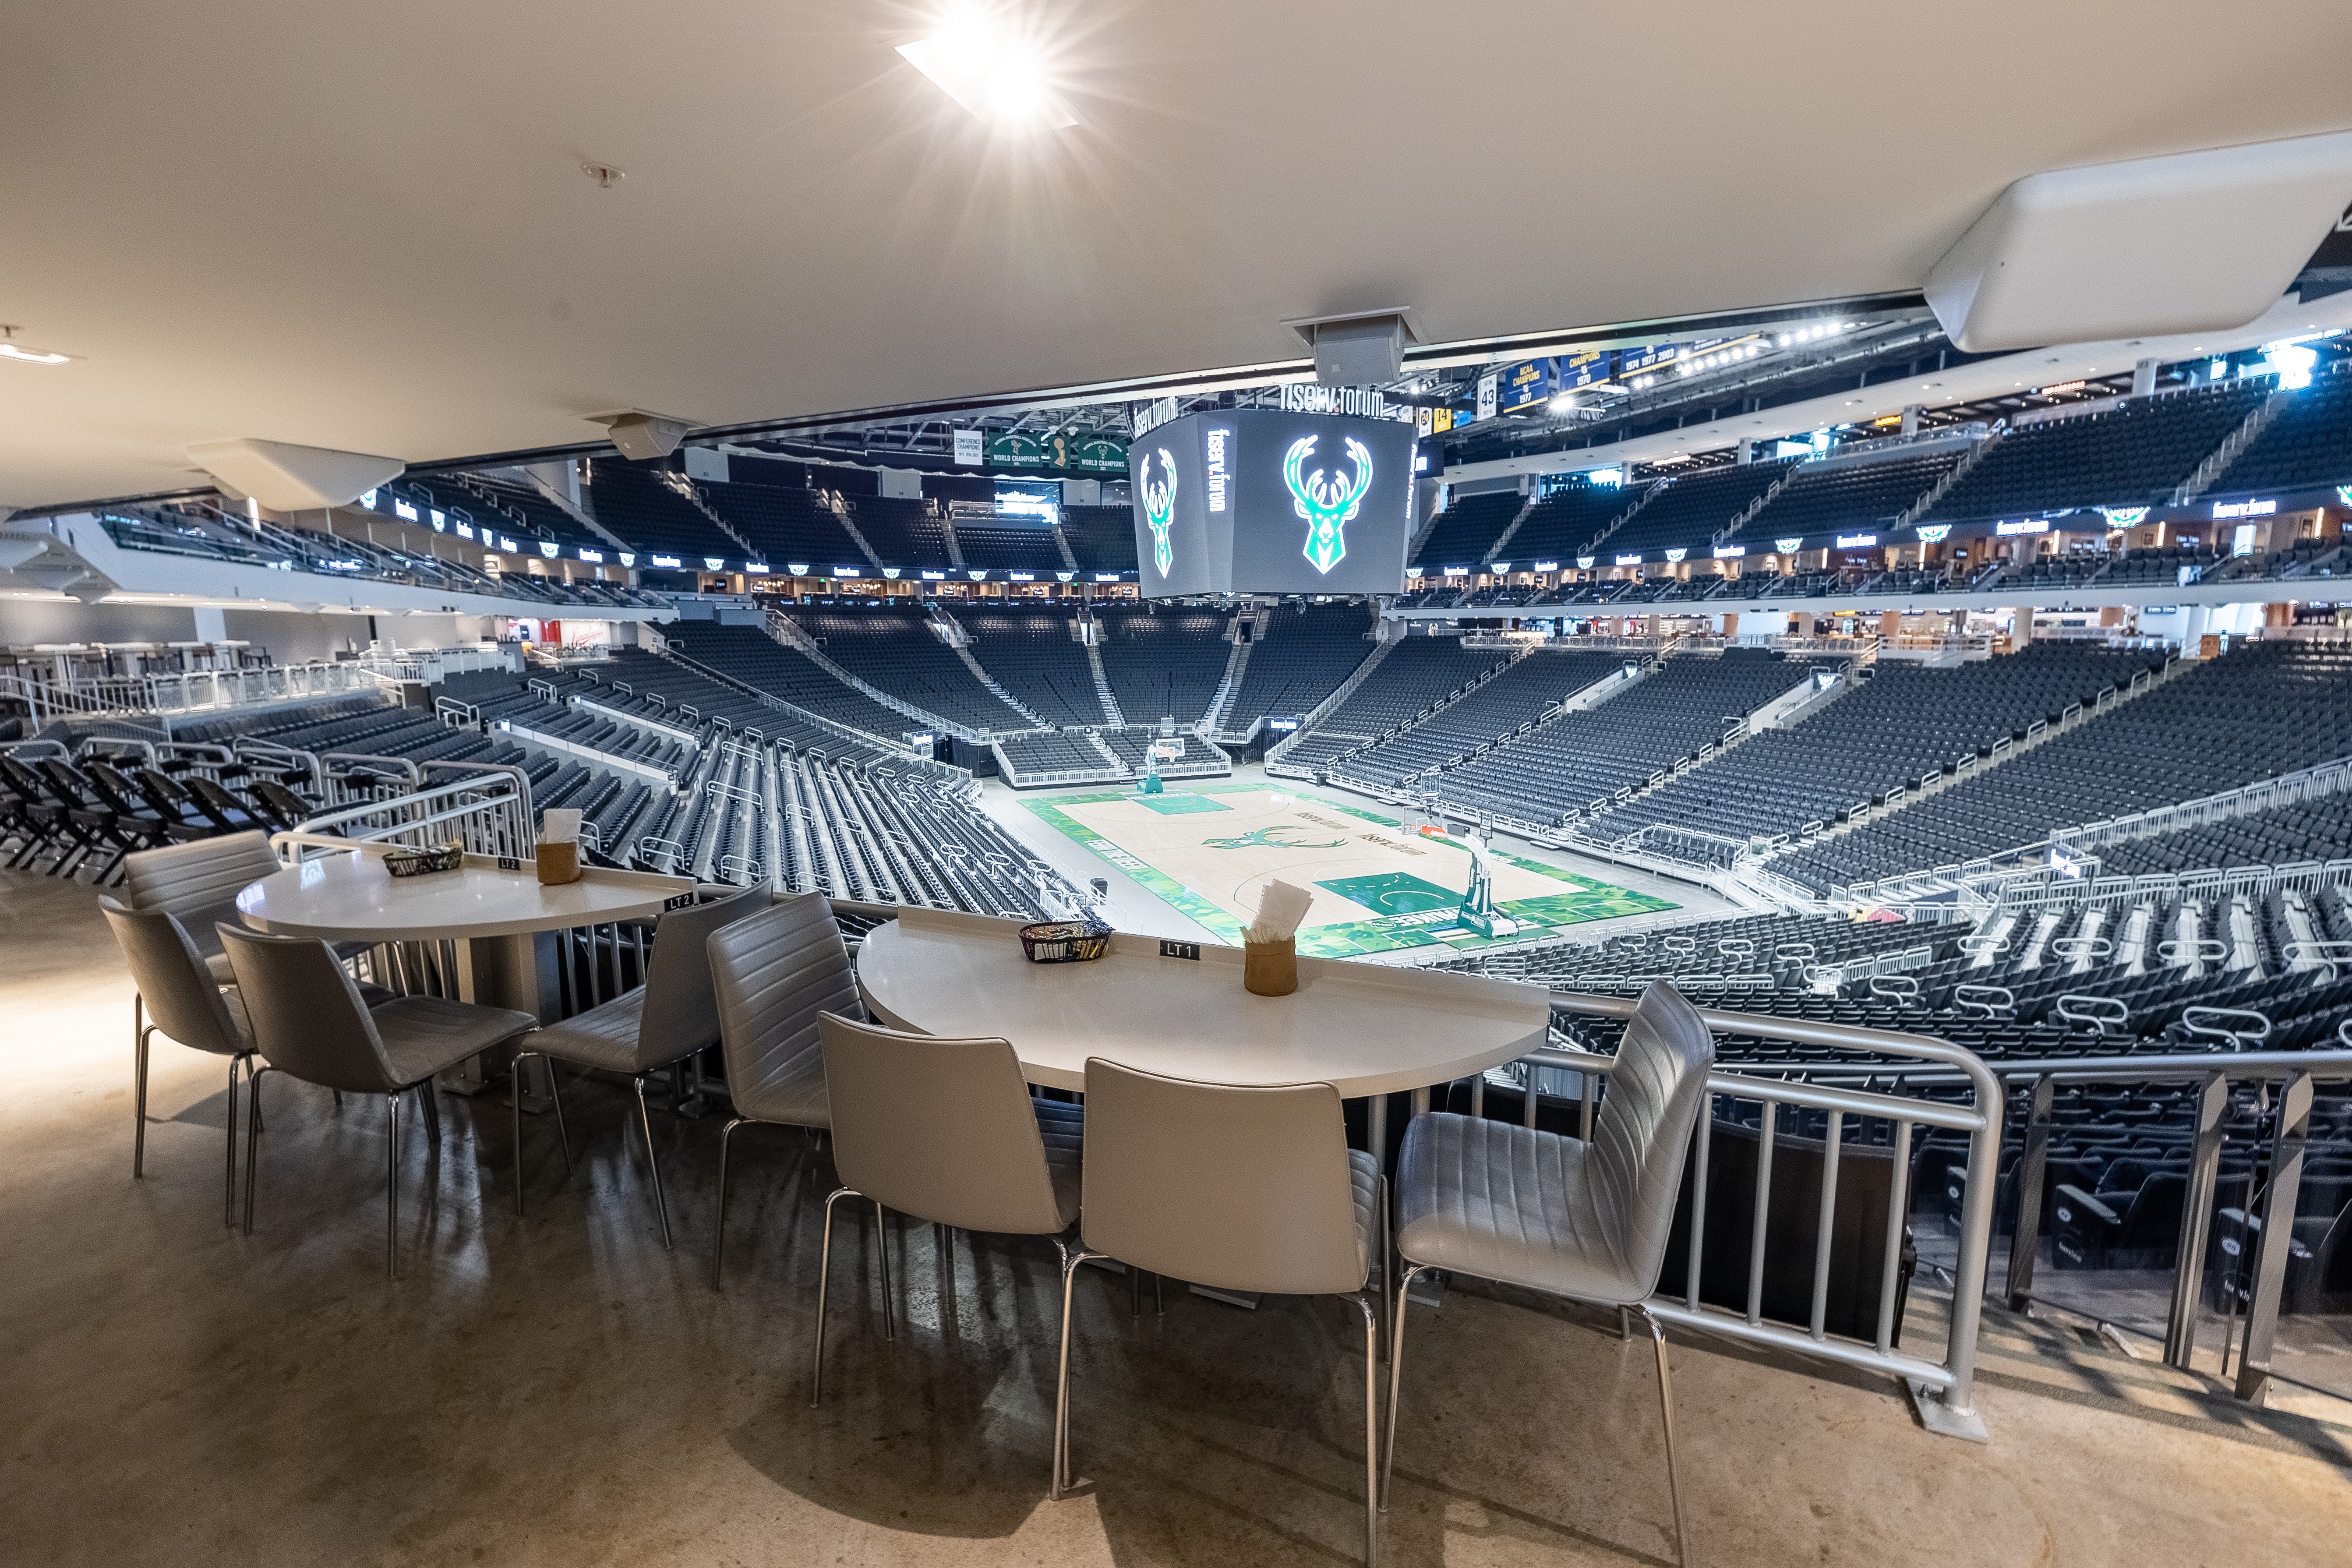 Indoor watch party at Fiserv Forum for Game 2 of NBA Finals sells out